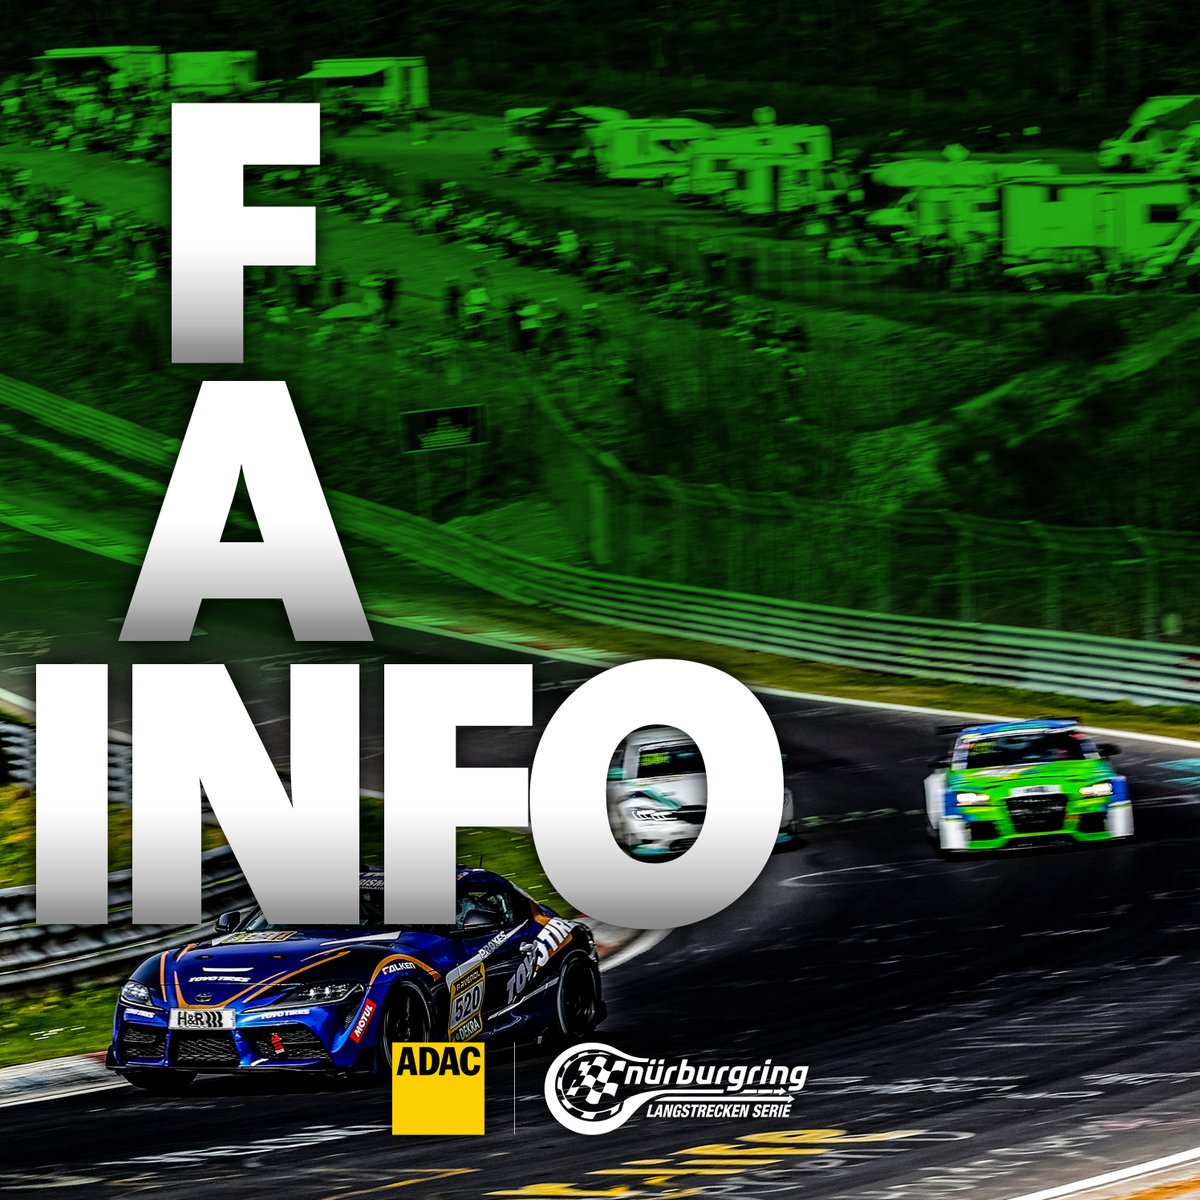 FAN INFO ADAC 24h Qualifiers (Saturday)! 🇩🇪 Stream: 16:45h 🇬🇧 Stream: 16:45h 🥇 Qualifying: 10:00 - 12:00h 🏁 Race start: 17:30h 📺 entry list, schedule and link to streams in BIO! ___ #NLS #Nürburgring #Nordschleife #myraceisfairplay #dasoriginal